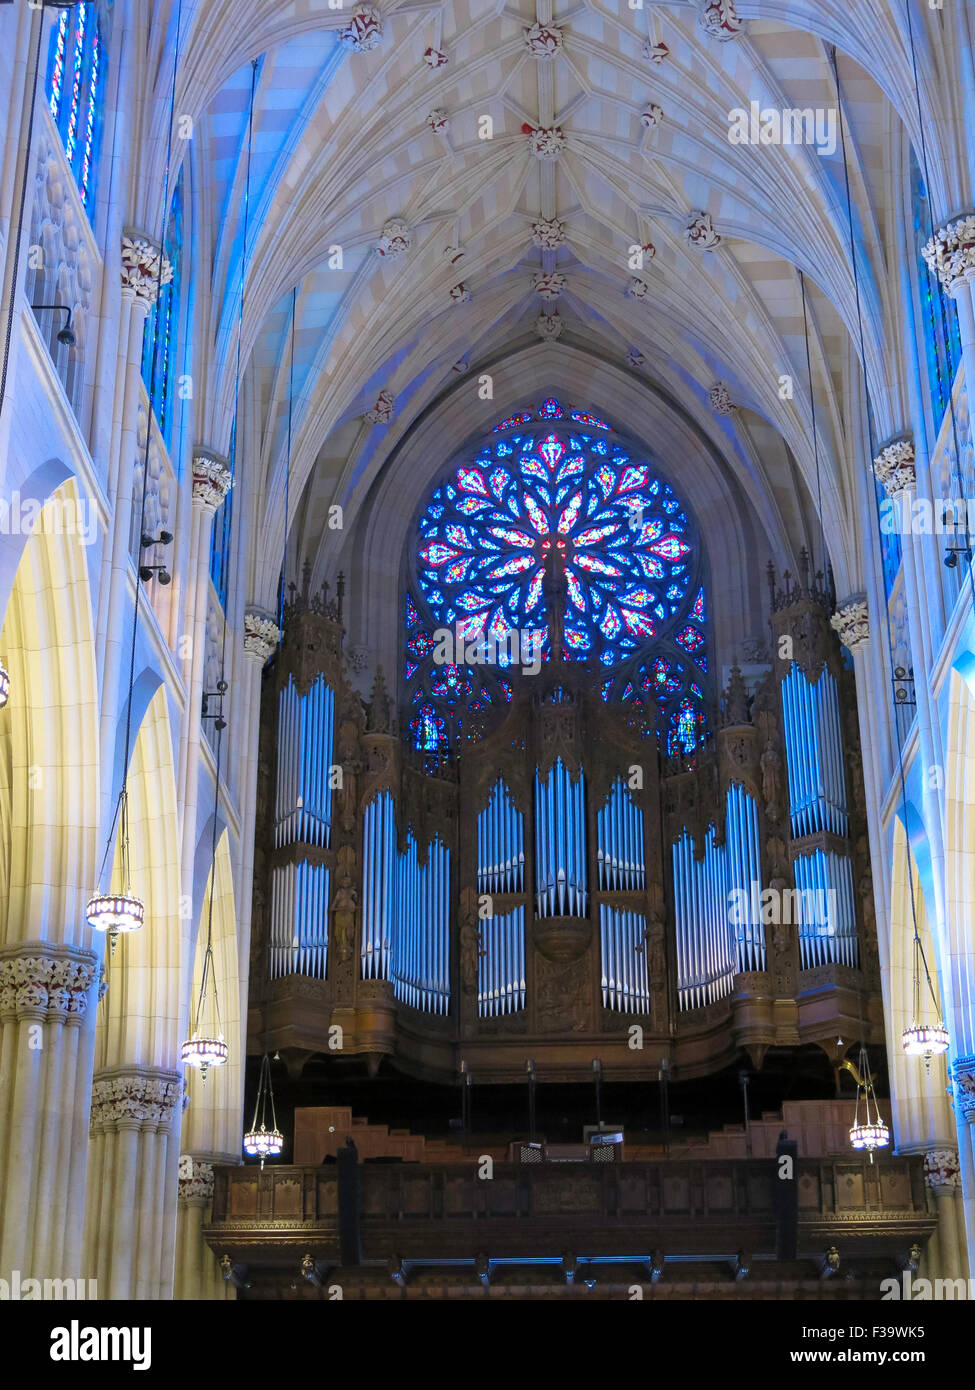 Interior, Cathedral of St. Patrick, Fifth Avenue, NYC Stock Photo